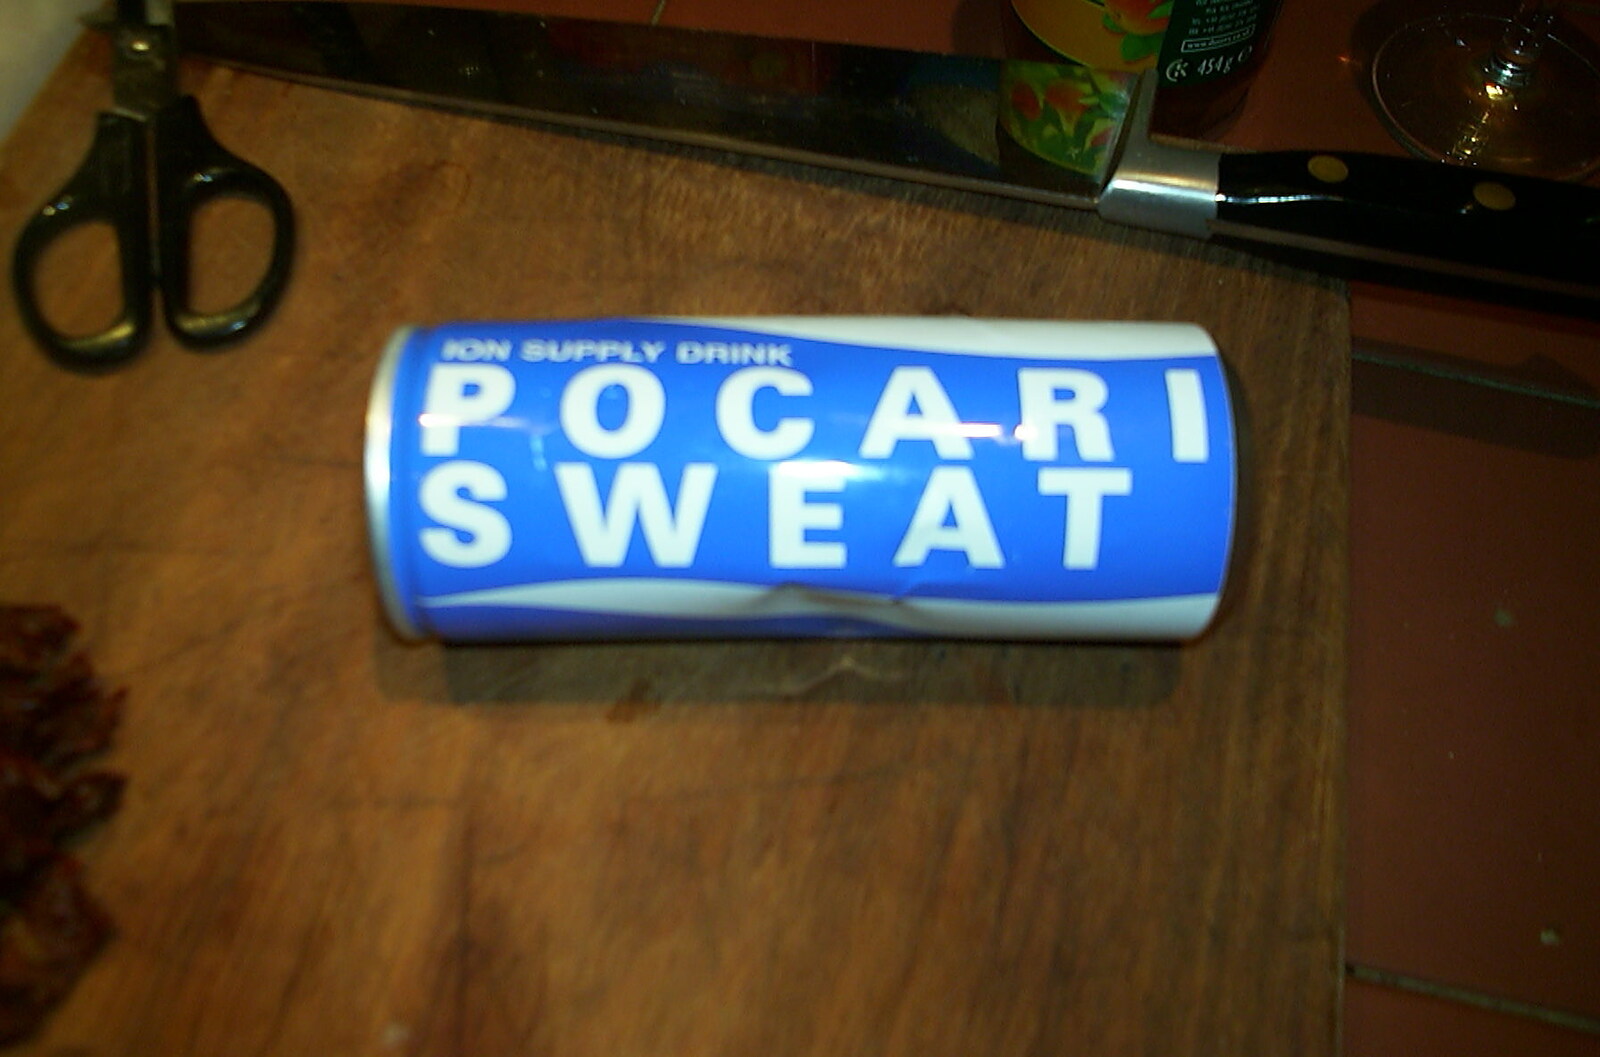 An emtpy can of Pocari Sweat, from Hong Kong from Mother and Mike Visit, and Cat Photos, Brome, Suffolk - 1st September 2002